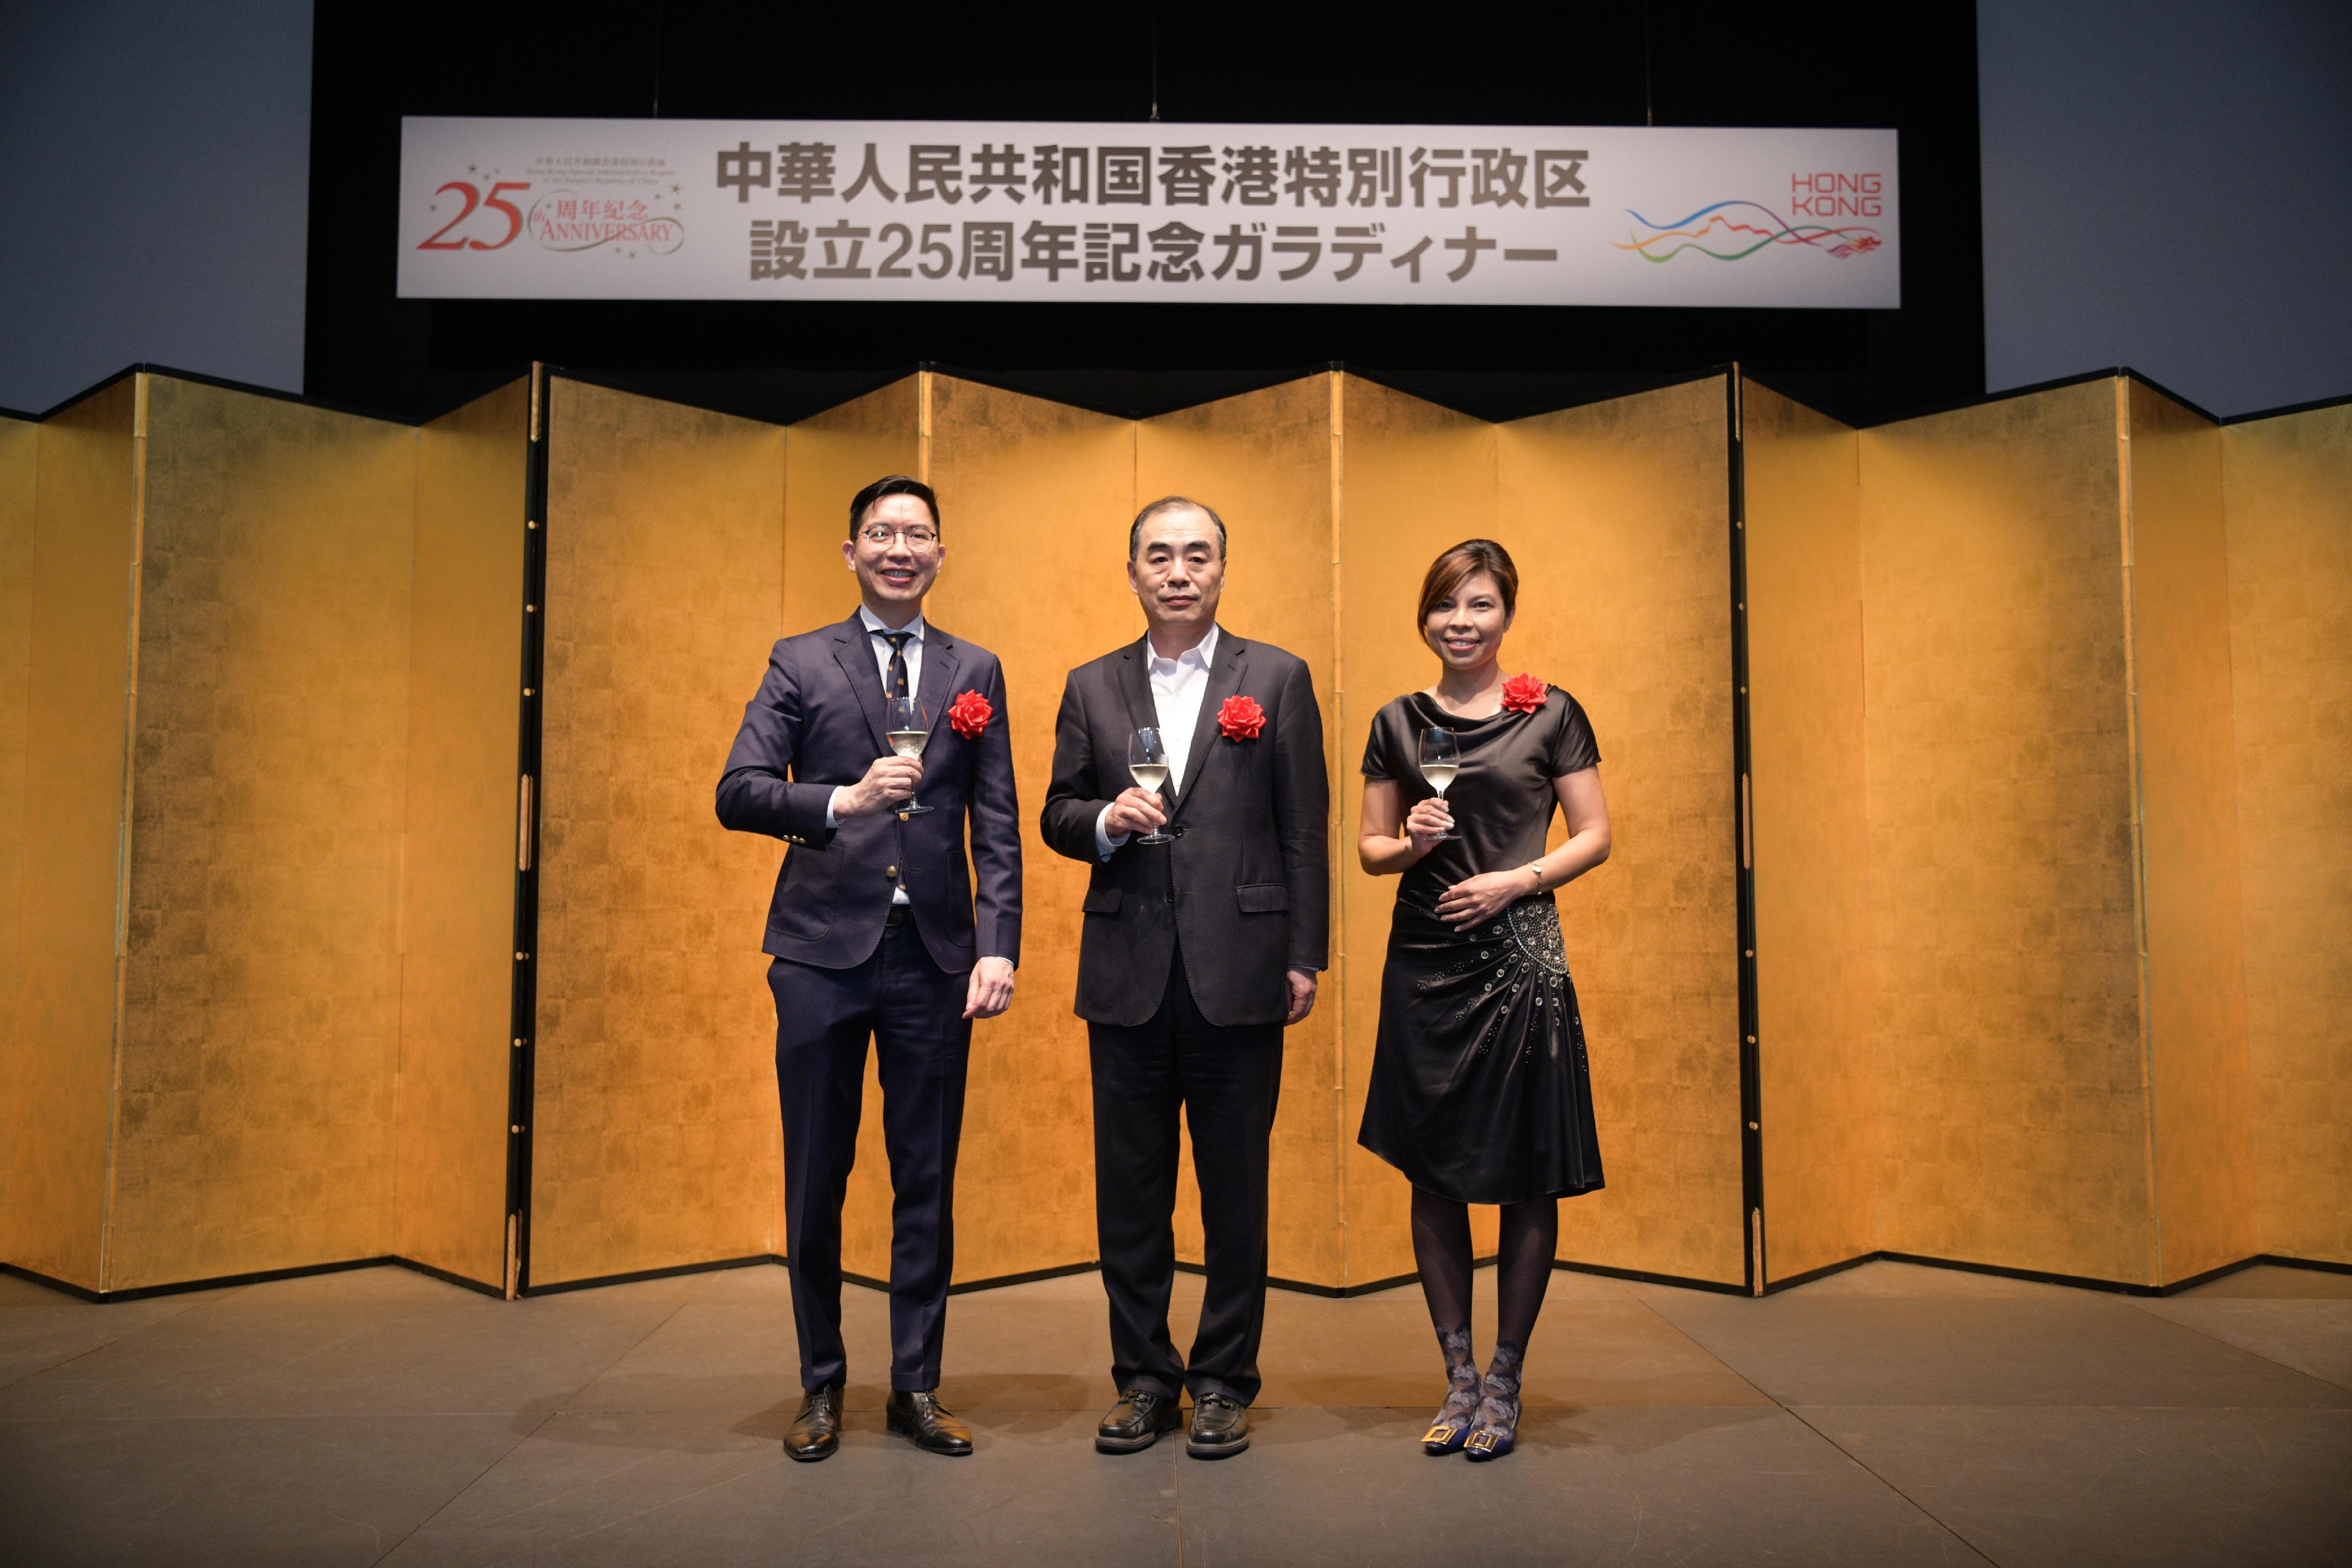 The Acting Principal Hong Kong Economic and Trade Representative (Tokyo), Mr Thomas Wu (left); the Chinese Ambassador to Japan, Mr Kong Xuanyou (centre); and the Hong Kong Economic and Trade Representative (Tokyo) (designate), Miss Winsome Au (right), propose a toast today (July 29) at a gala dinner in Tokyo, Japan, to celebrate the 25th anniversary of the establishment of the Hong Kong Special Administrative Region.